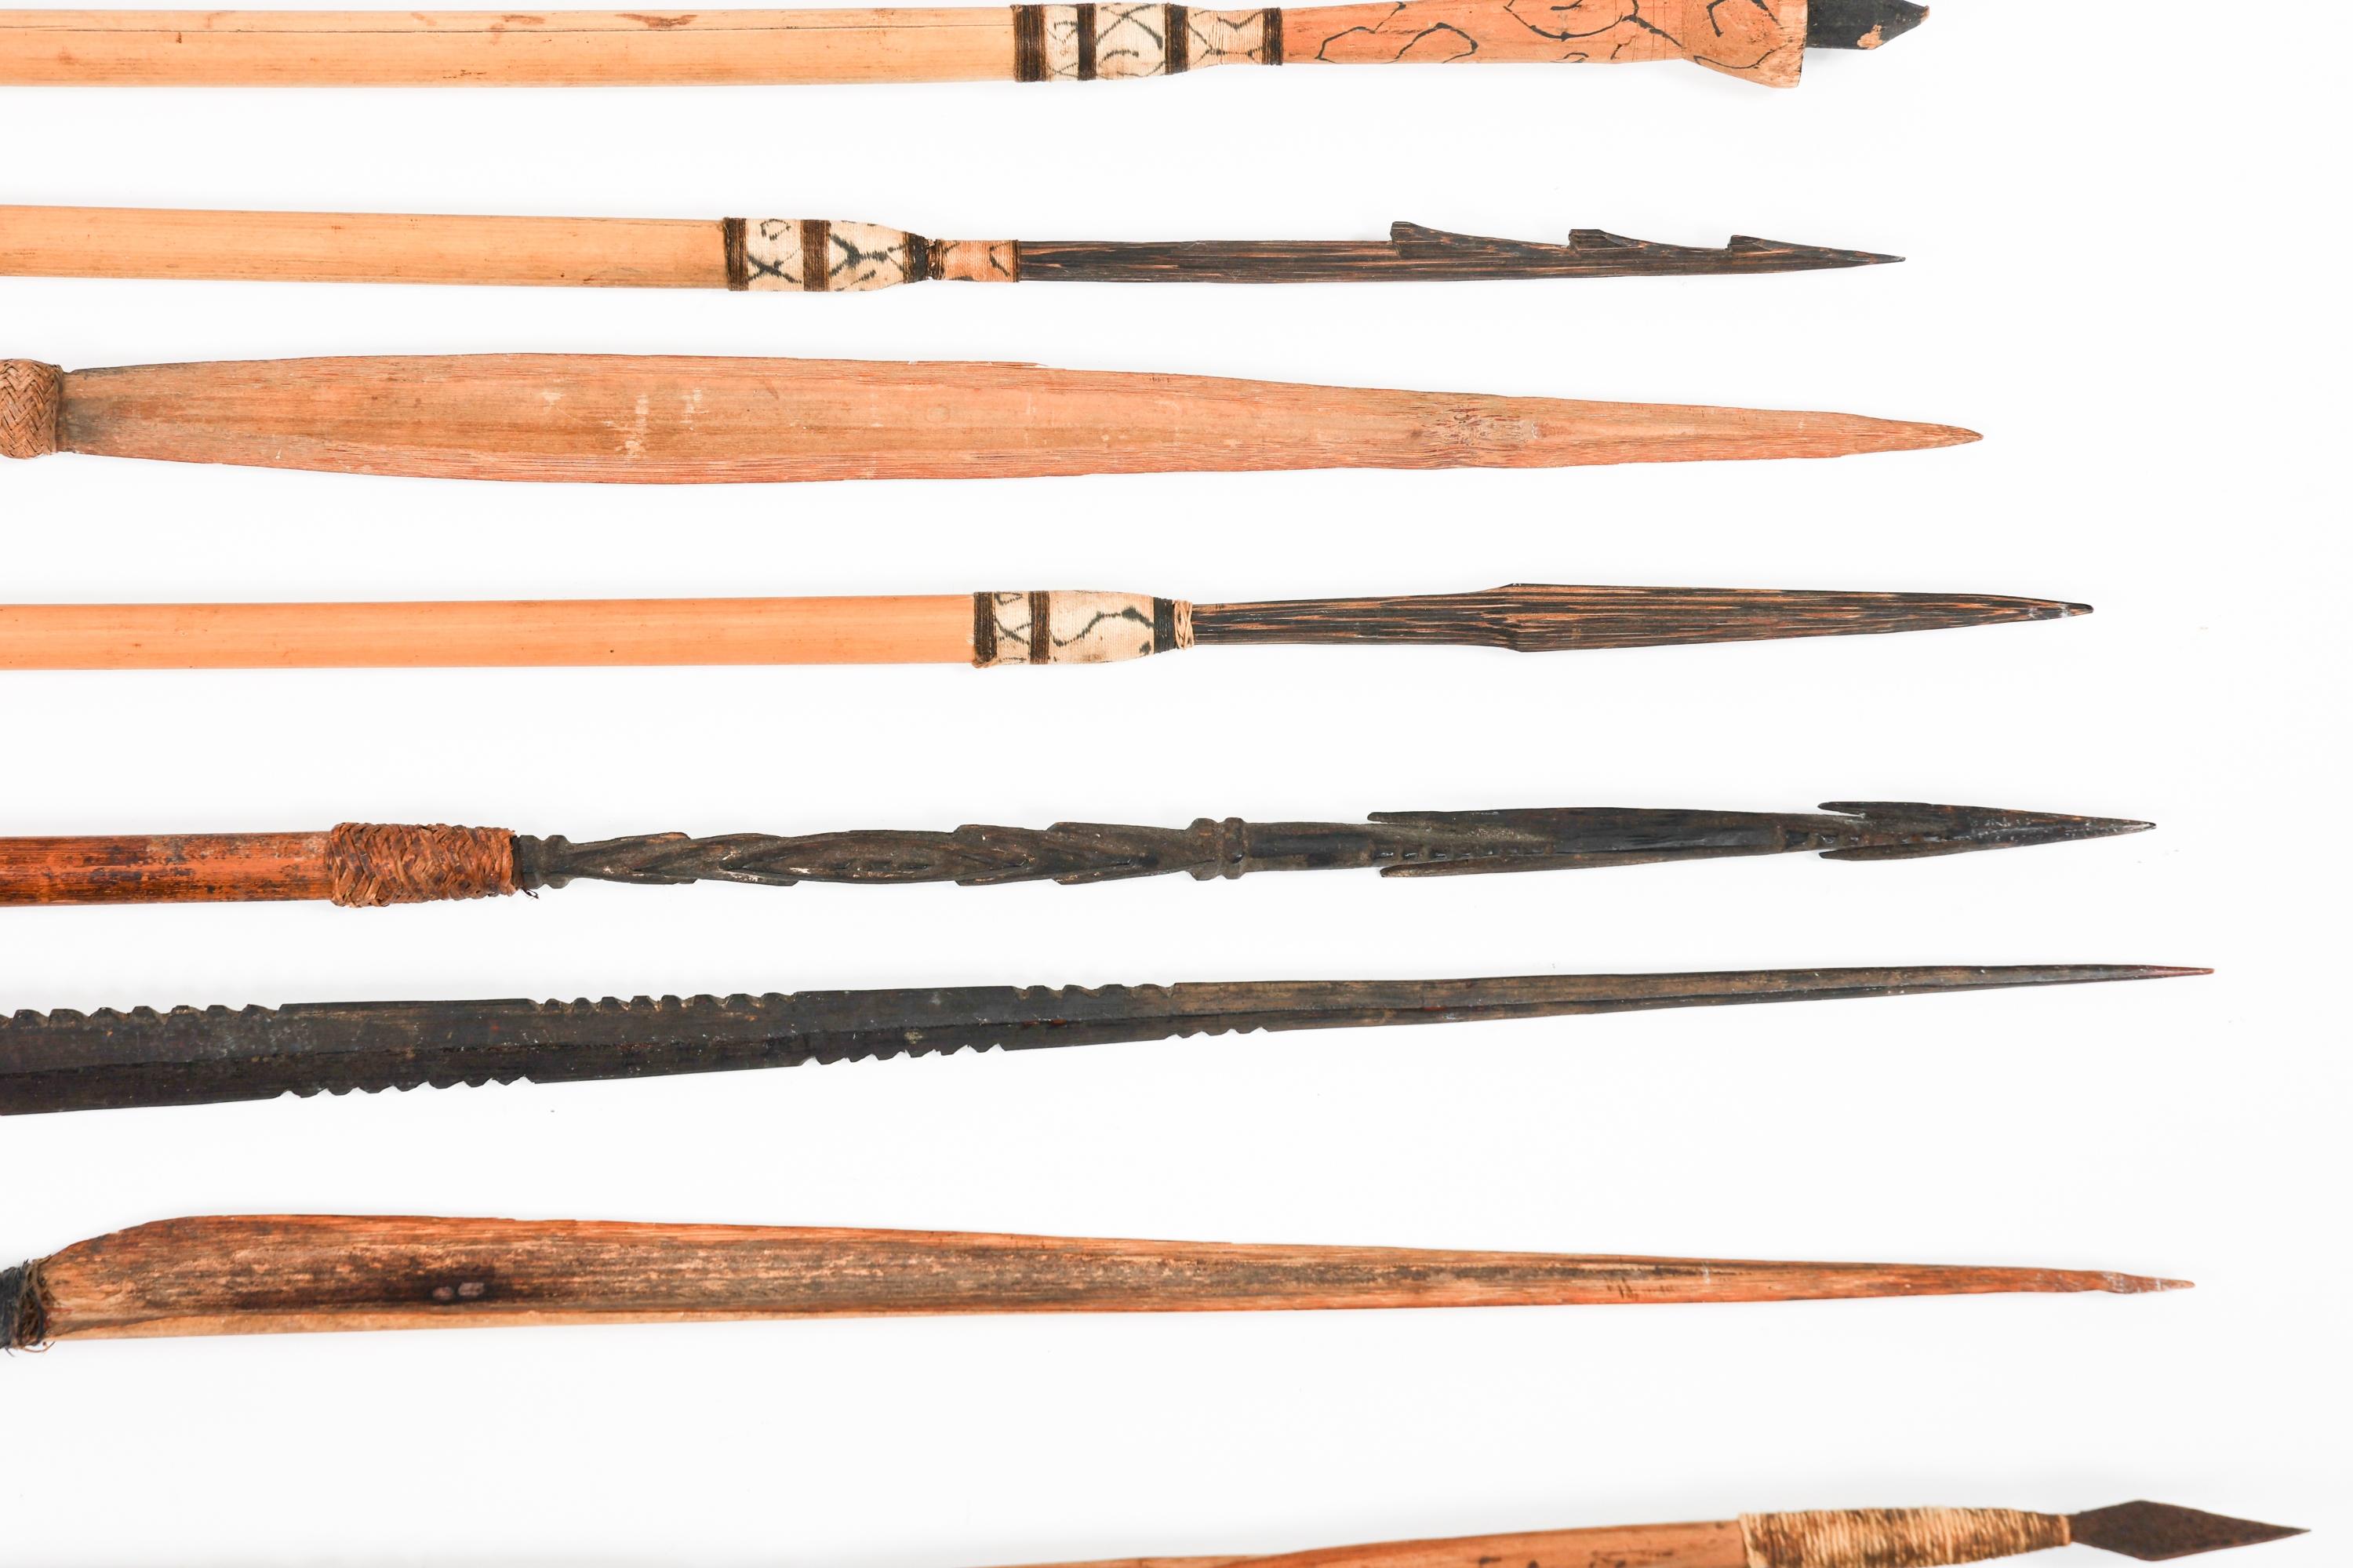 SOUTHEAST ASIAN FISHING - HUNTING SPEARS